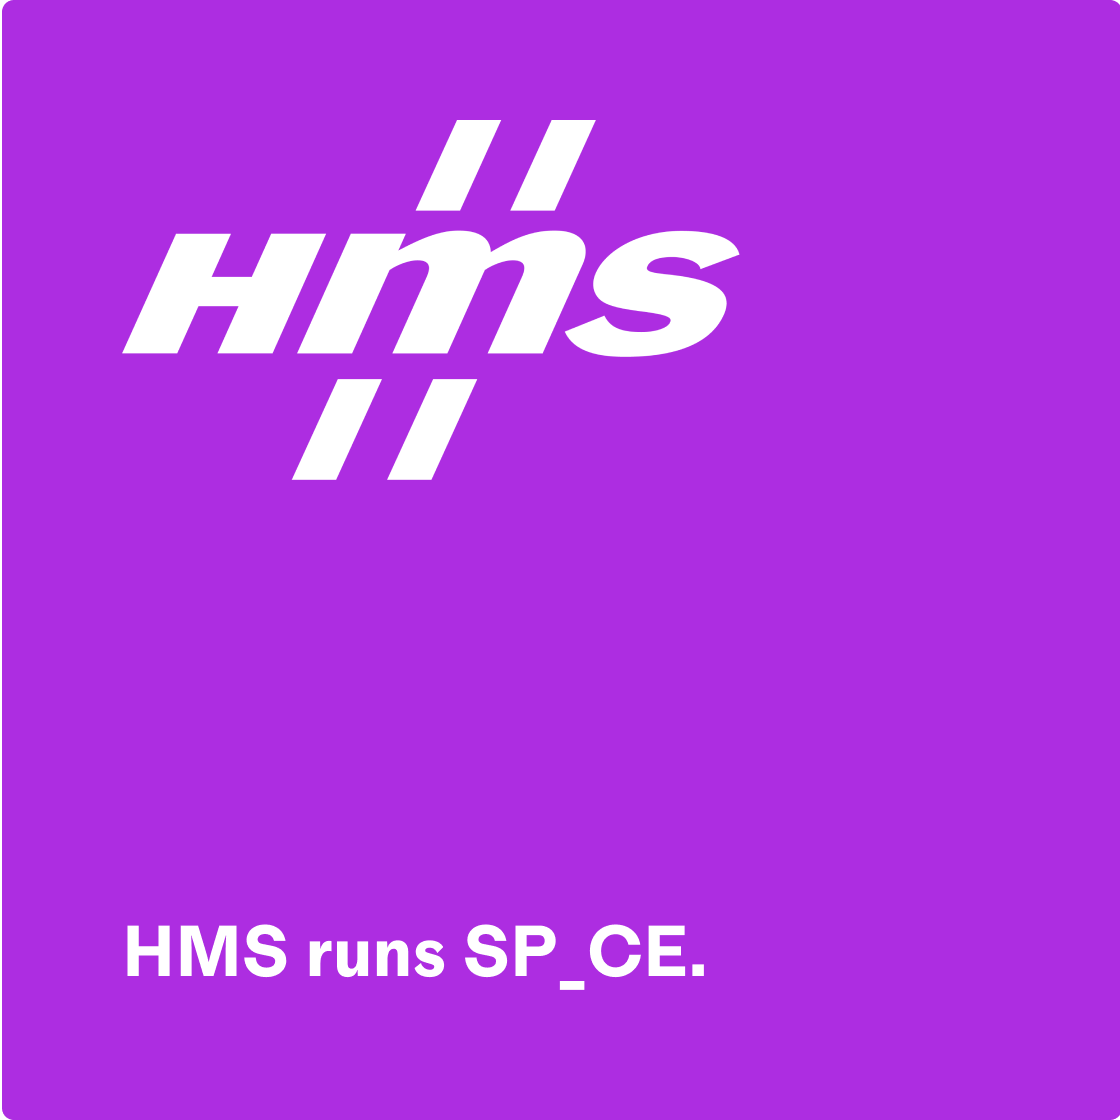 HMS use SP CE for partner enablement